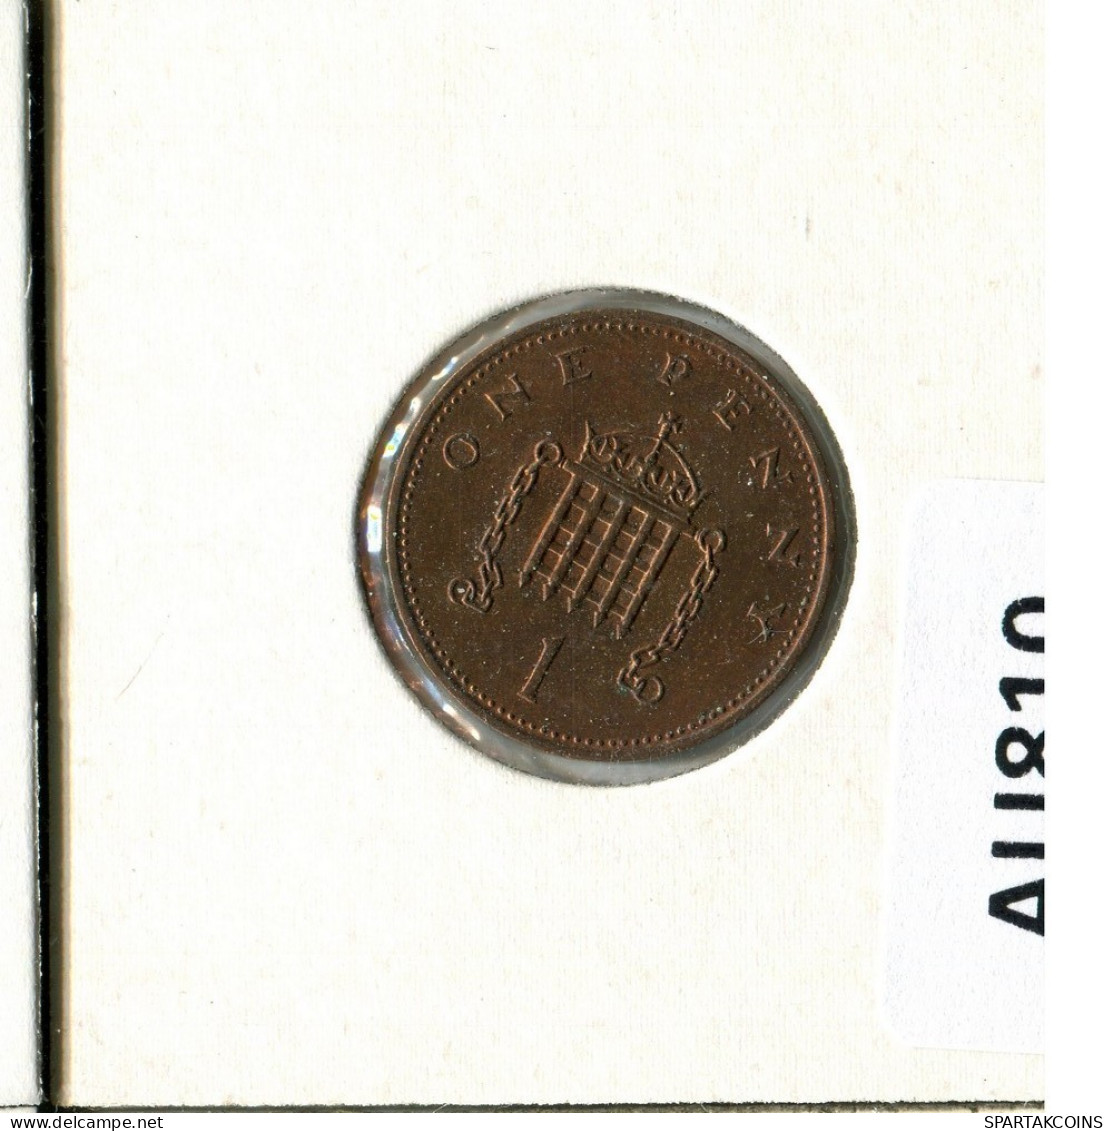 PENNY 1984 UK GREAT BRITAIN Coin #AU810.U.A - 1 Penny & 1 New Penny